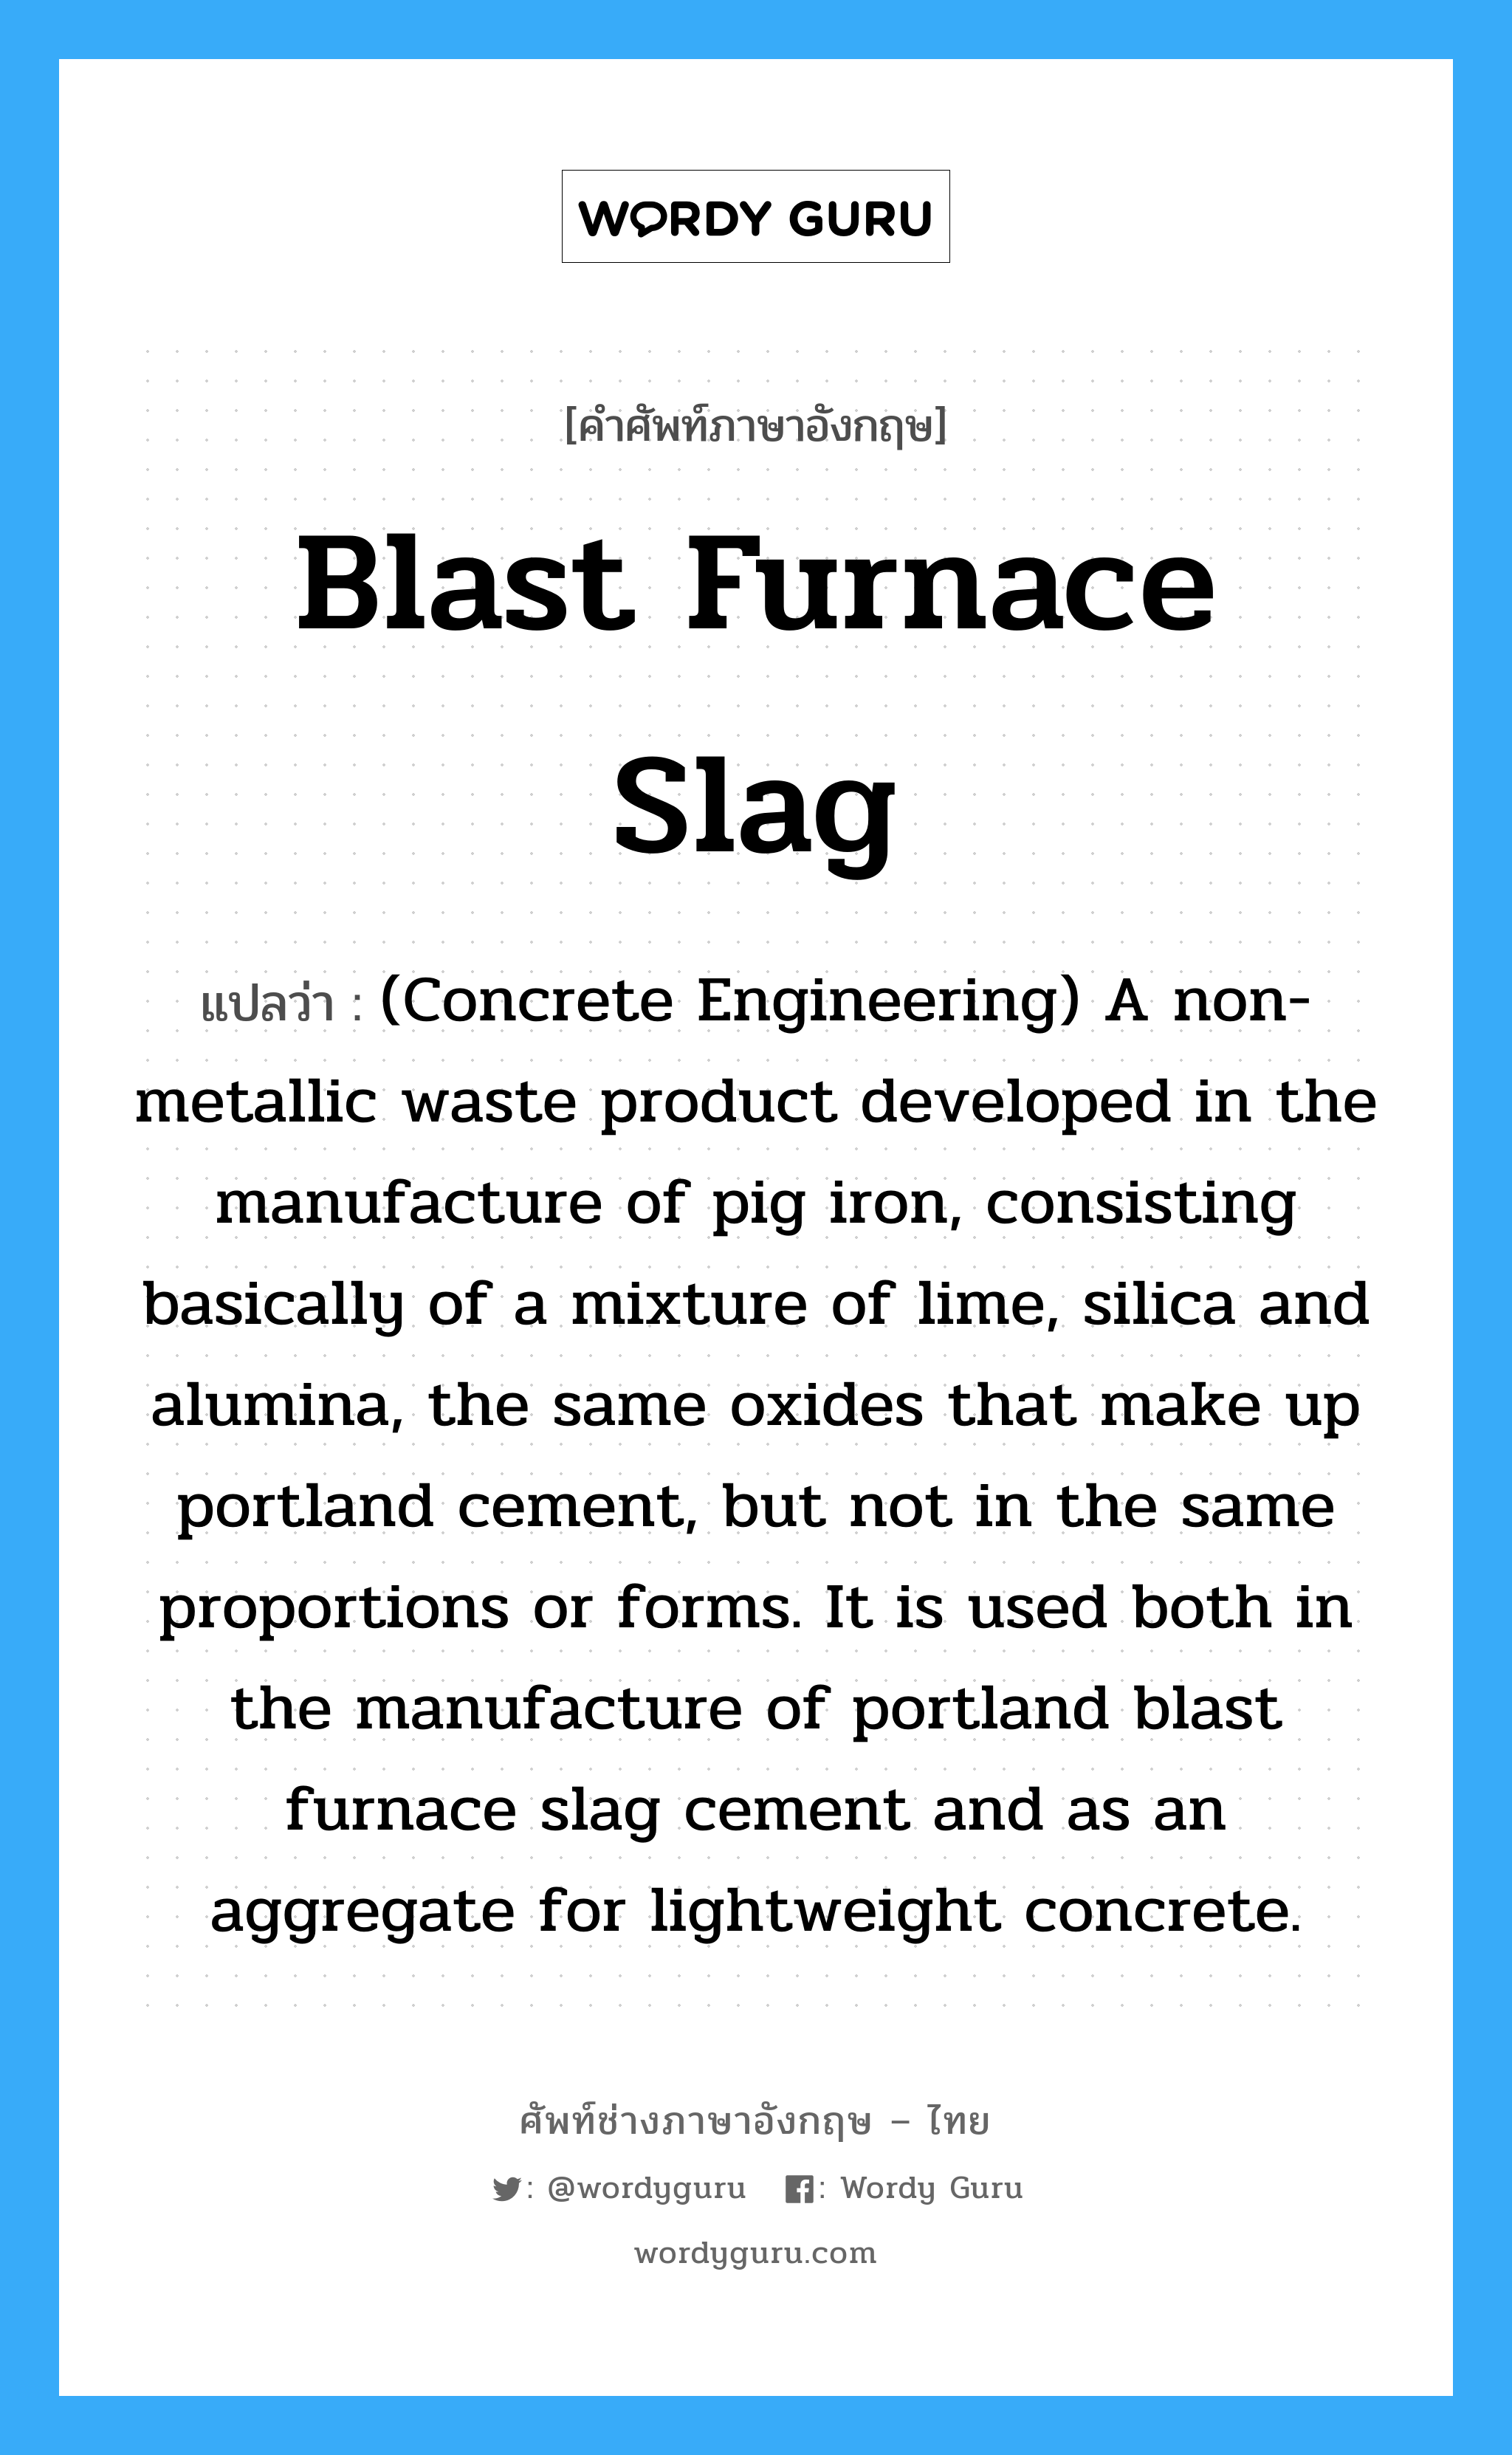 Blast Furnace Slag แปลว่า?, คำศัพท์ช่างภาษาอังกฤษ - ไทย Blast Furnace Slag คำศัพท์ภาษาอังกฤษ Blast Furnace Slag แปลว่า (Concrete Engineering) A non-metallic waste product developed in the manufacture of pig iron, consisting basically of a mixture of lime, silica and alumina, the same oxides that make up portland cement, but not in the same proportions or forms. It is used both in the manufacture of portland blast furnace slag cement and as an aggregate for lightweight concrete.